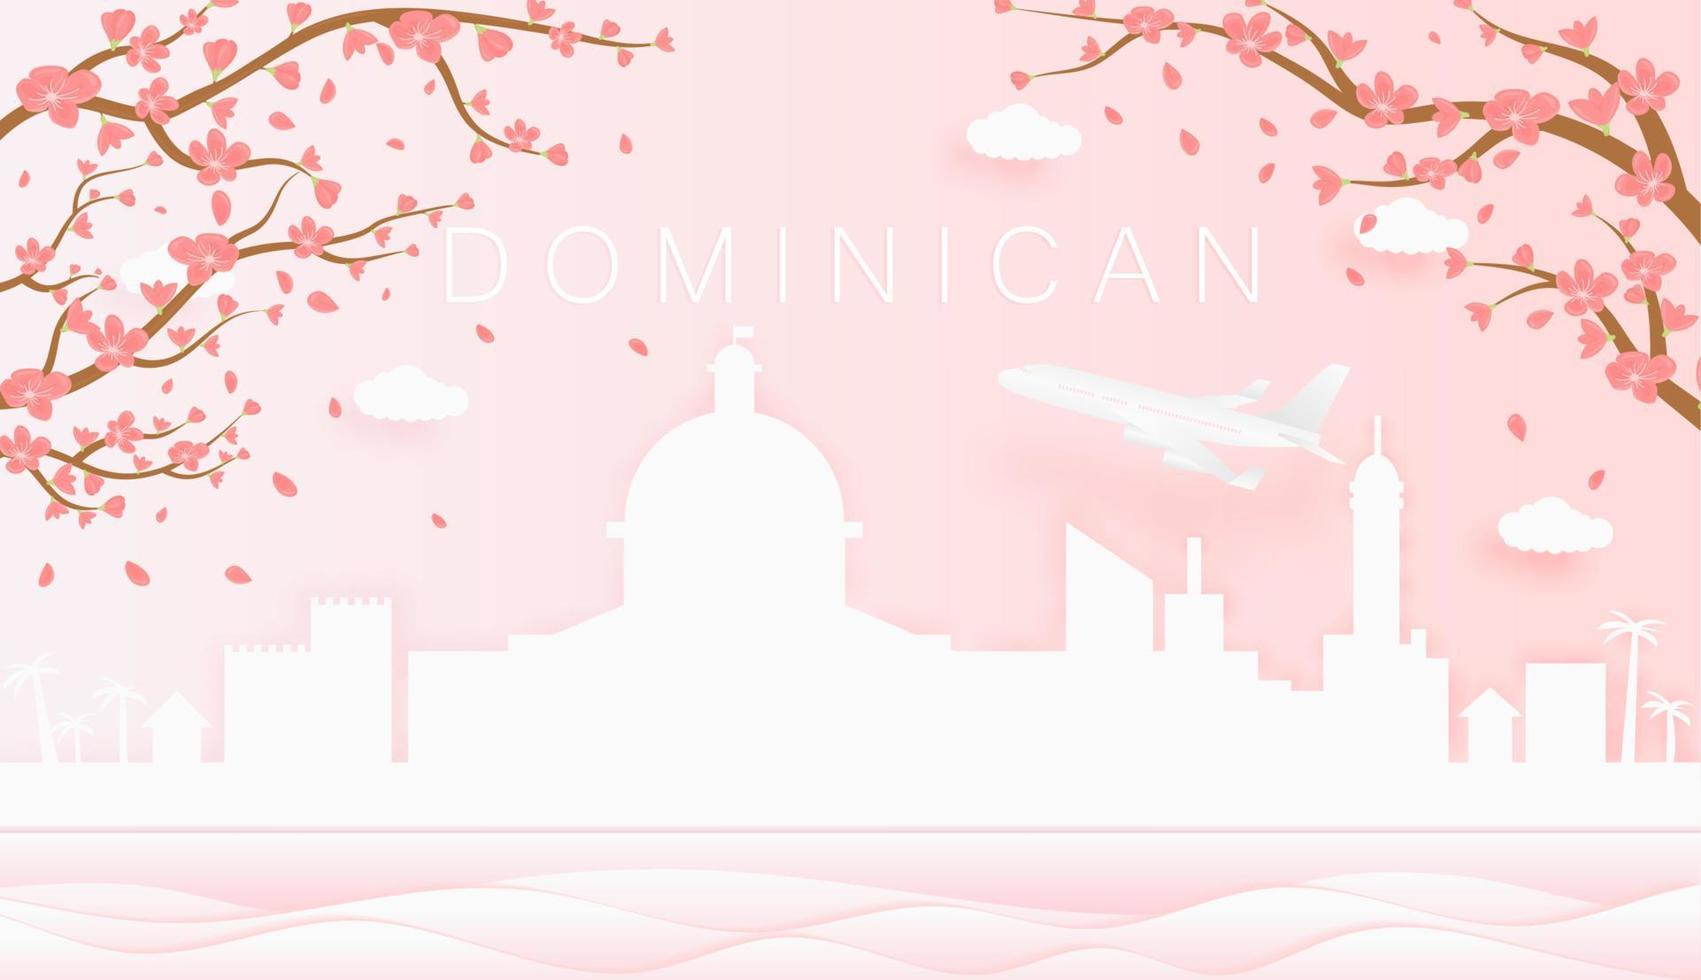 Panorama travel postcard, poster, tour advertising of world famous landmarks of Dominican, spring season with blooming flowers in tree vector icon